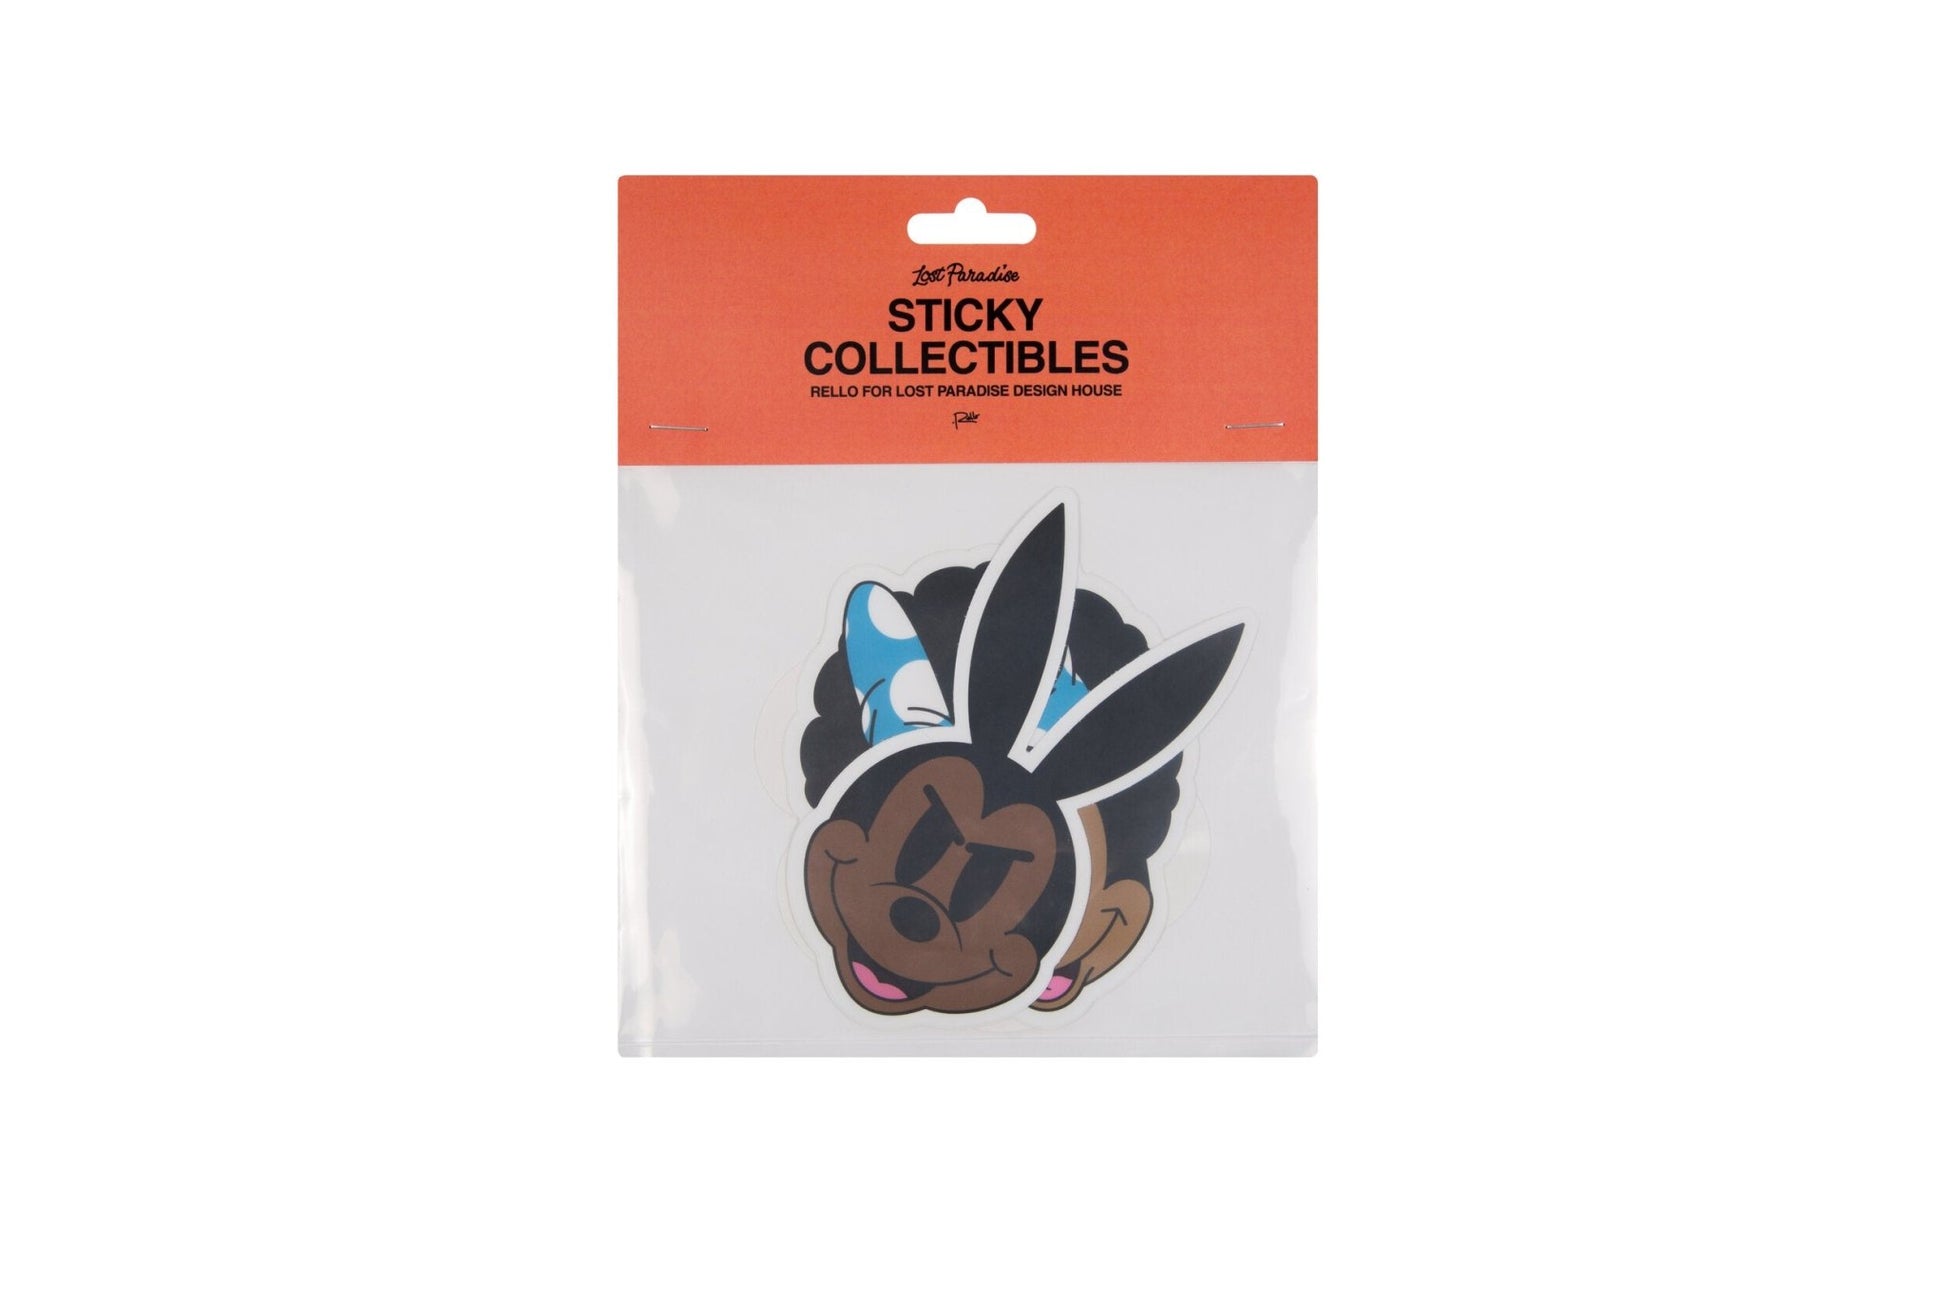 STICKY COLLECTIBLES - by RELLO - UNDERRATED SHOP